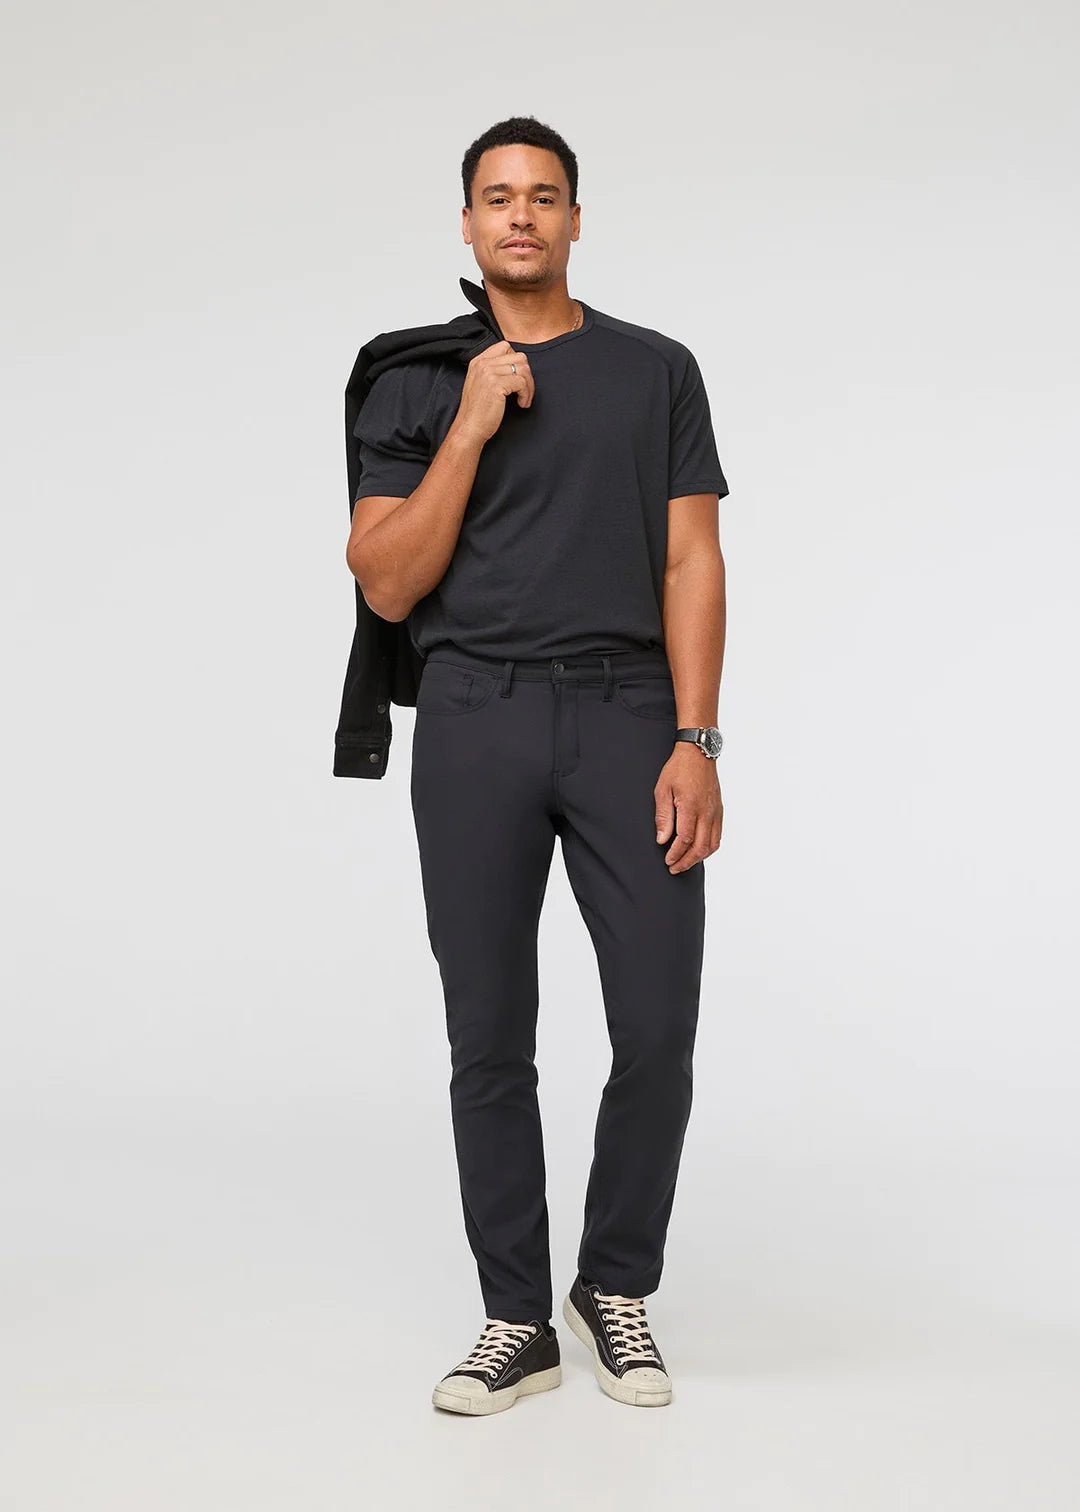 DUER's NuStretch Relaxed 5-Pocket Pant in the color Black